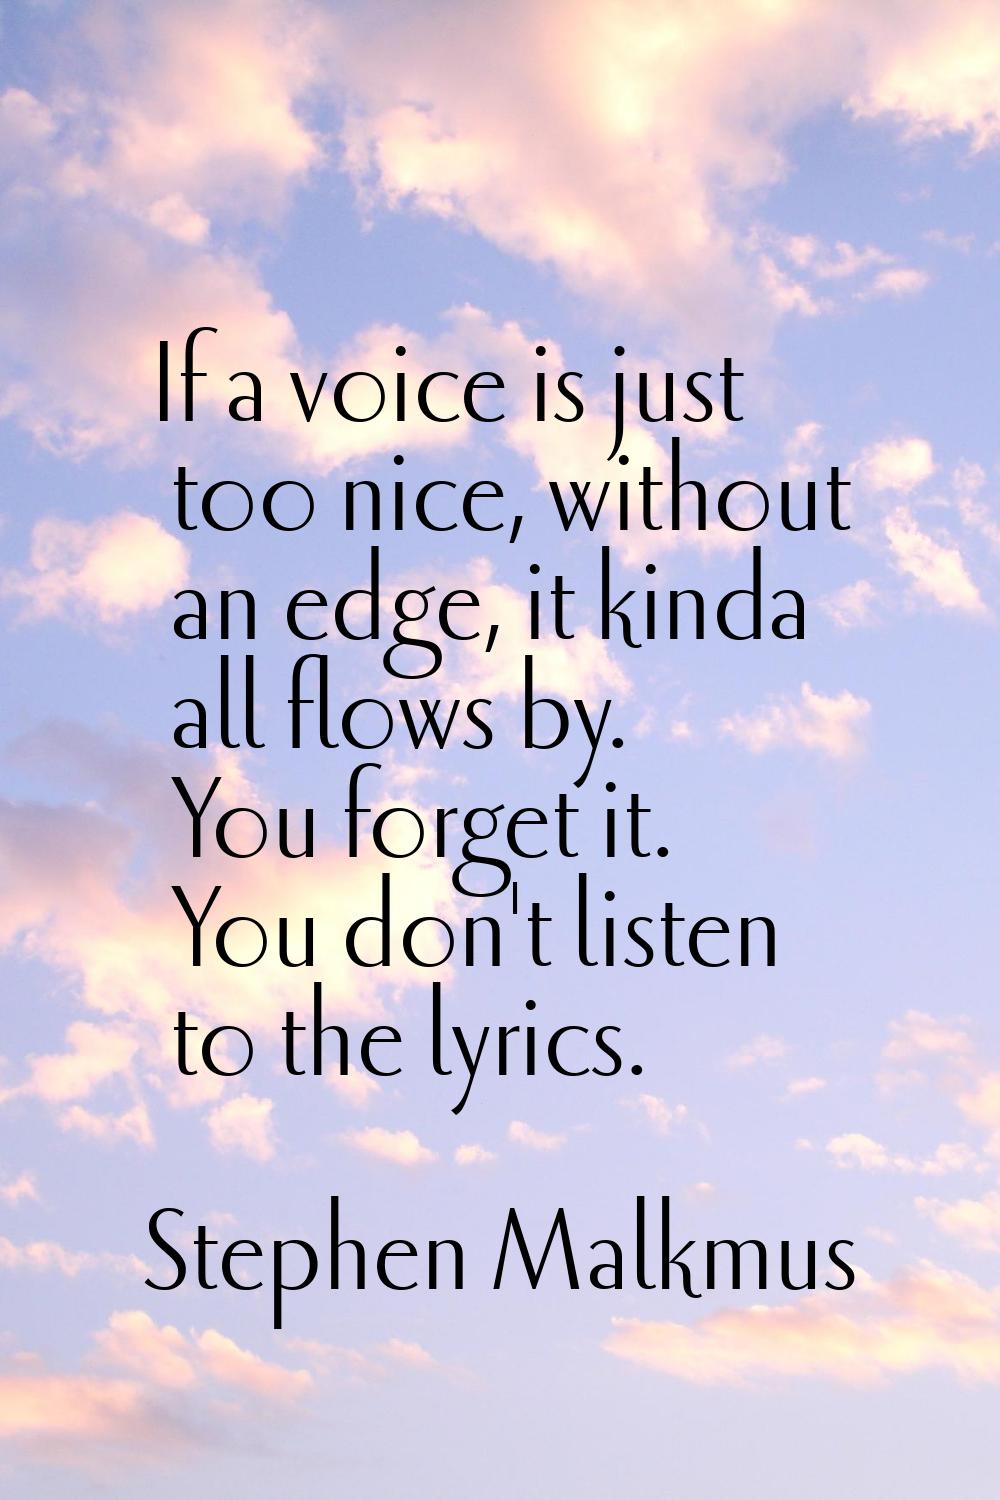 If a voice is just too nice, without an edge, it kinda all flows by. You forget it. You don't liste